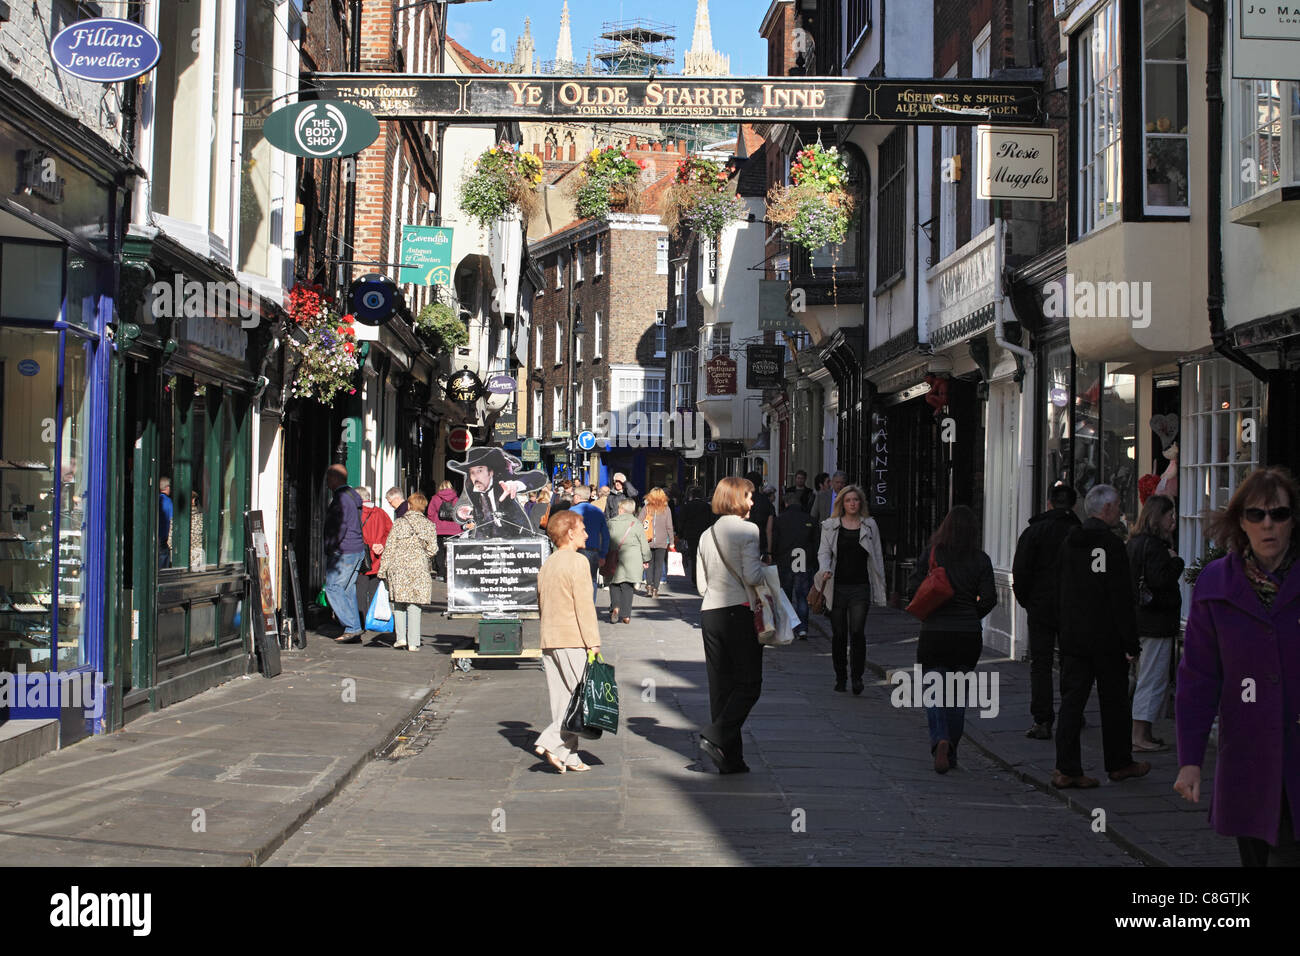 People walking along Stonegate in York, North Yorkshire, England Stock Photo